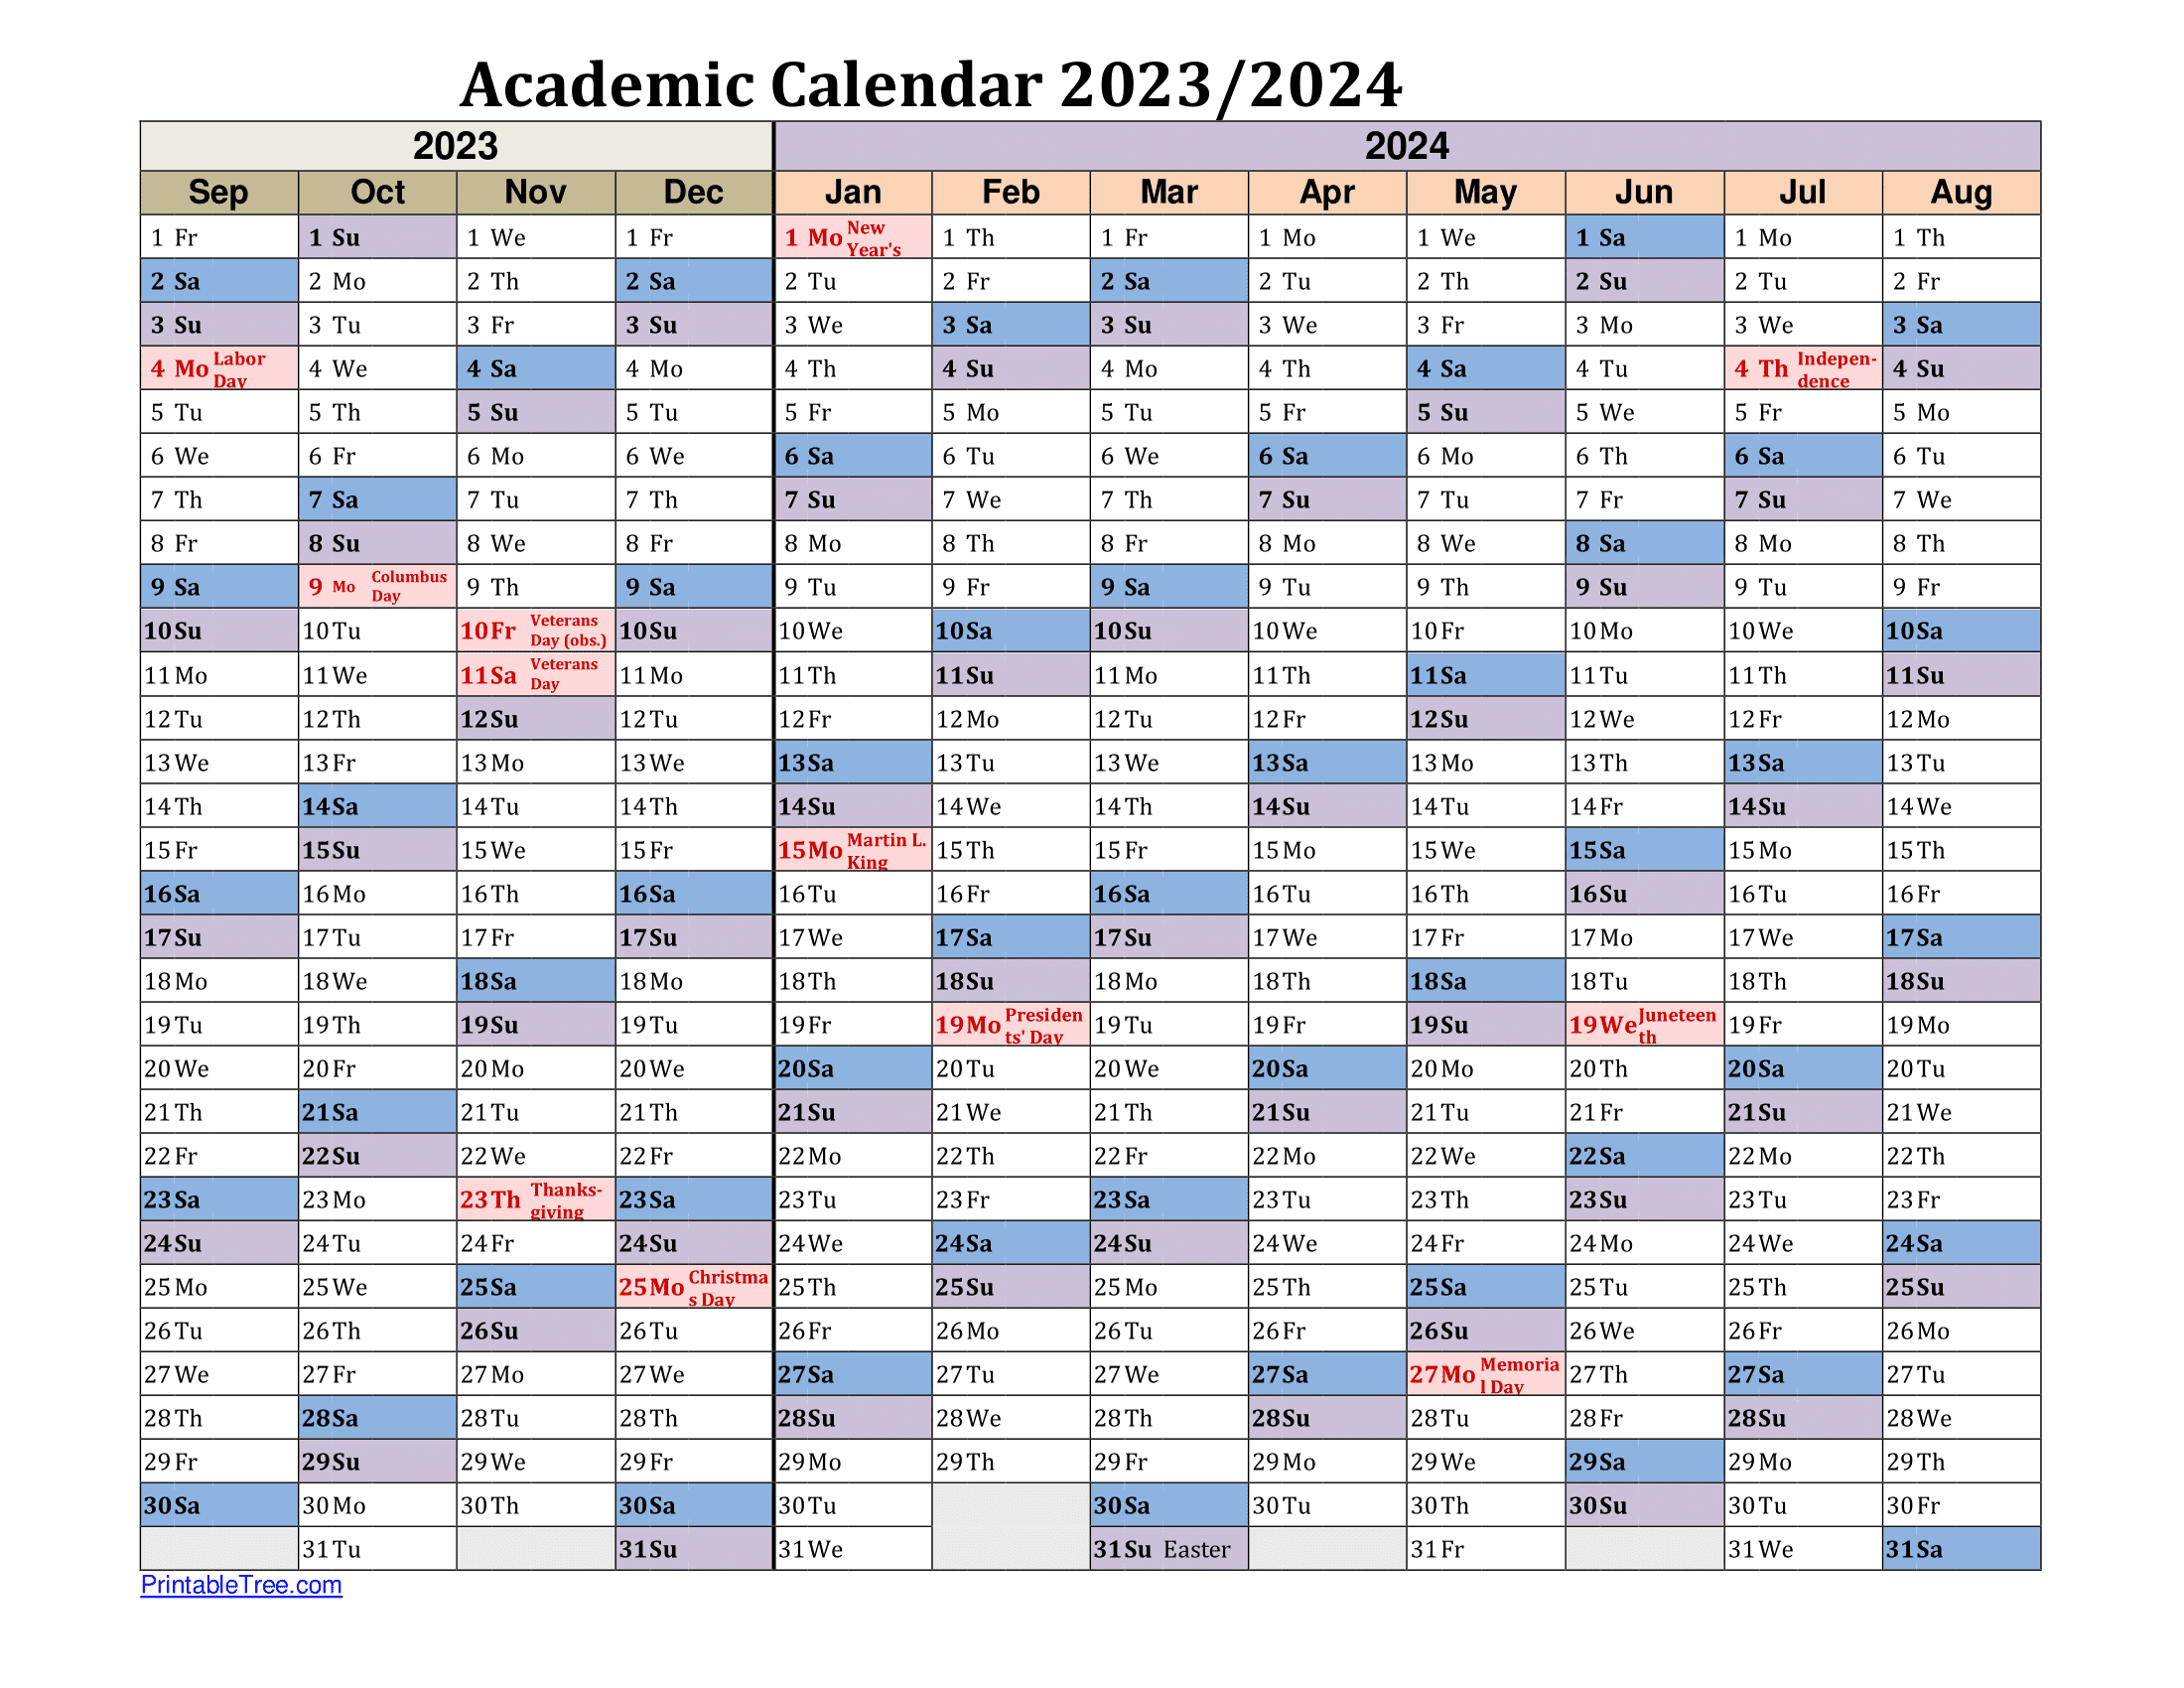 Free Calendar 2024 With Academic And Exam Dates And Locations Renee